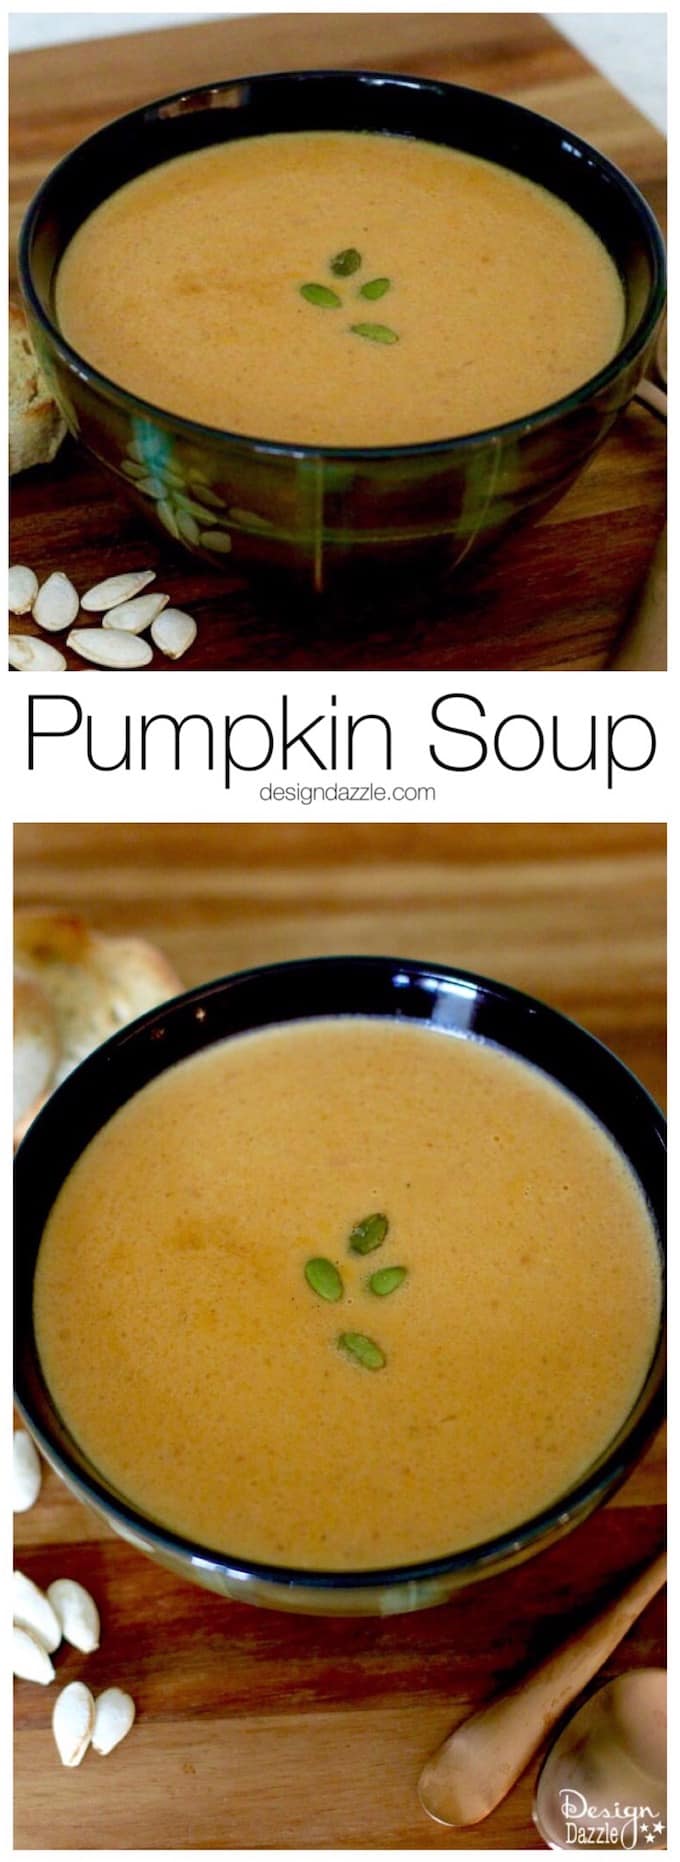 This pumpkin soup recipe is yummy and it freezes easily! It's the perfect meal for around the holidays! It's cozy, warm, fast, easy, and delicious. | homemade pumpkin recipes | fall soup recipes | pumpkin soup recipe | healthy soup recipe | fall recipe ideas || Design Dazzle #souprecipes #pumpkinsoup #pumpkinrecipe #fallrecipes 